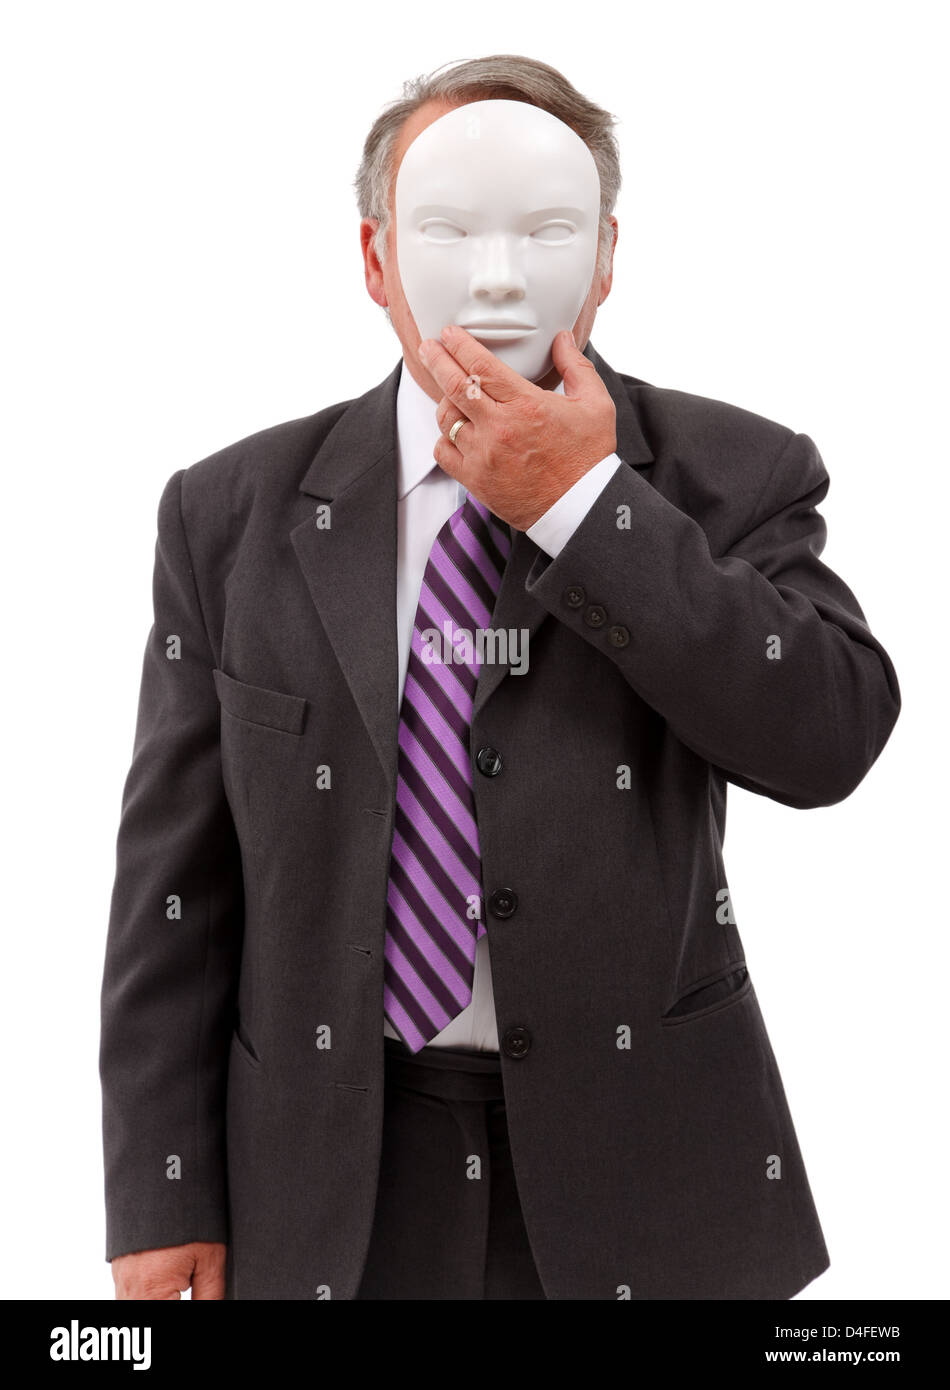 Business man covering his face with white mask Stock Photo